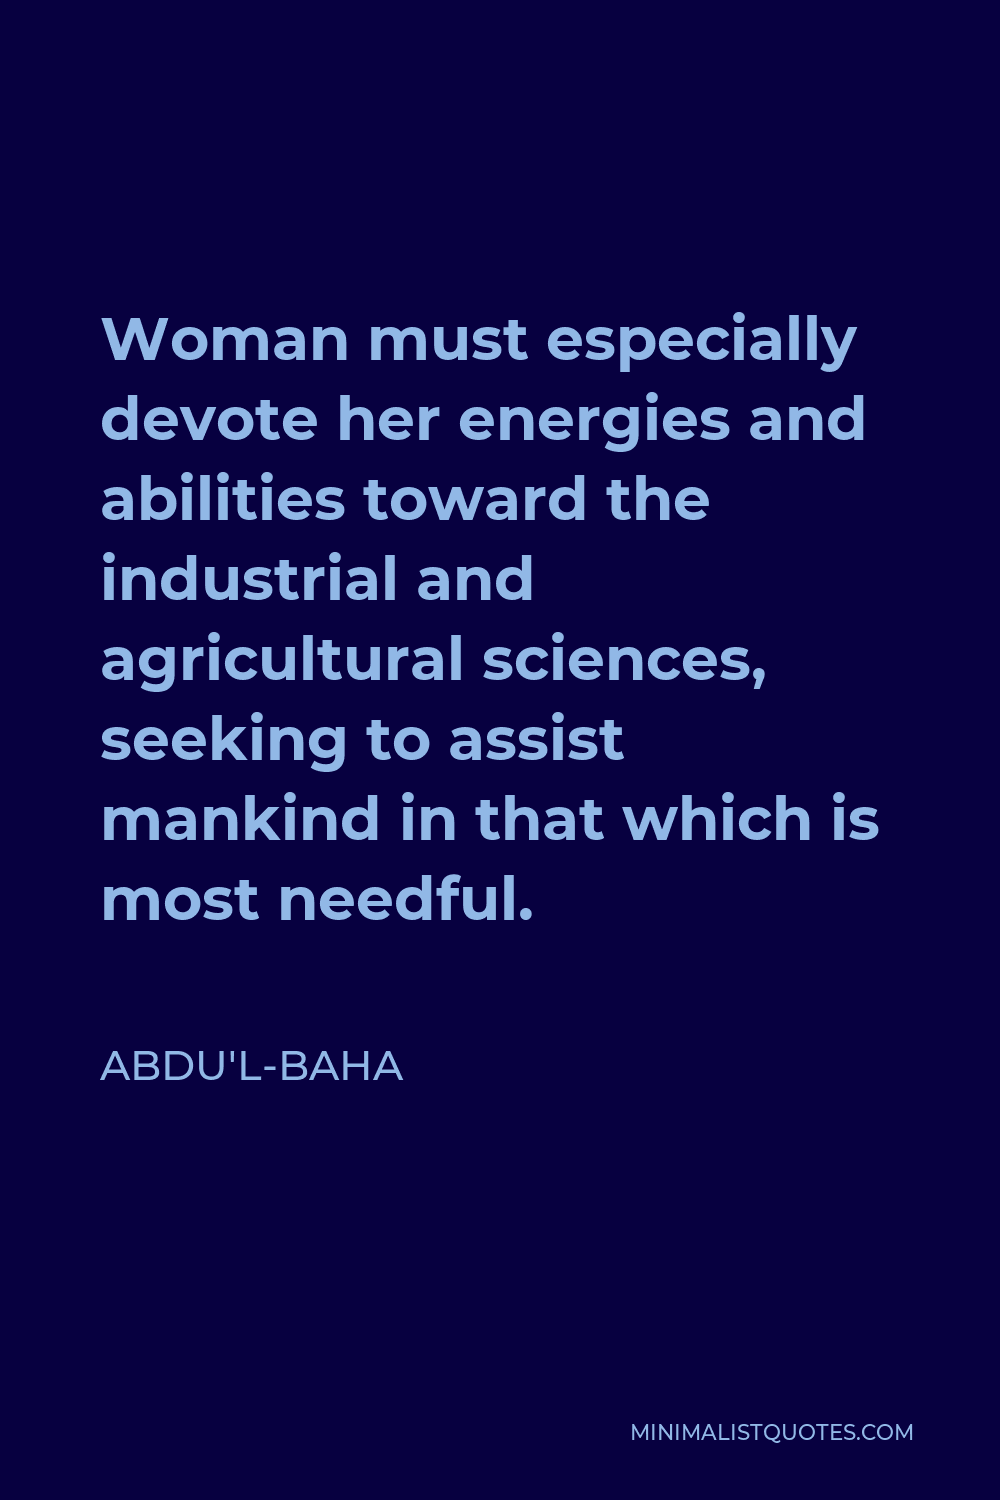 Abdu'l-Baha Quote - Woman must especially devote her energies and abilities toward the industrial and agricultural sciences, seeking to assist mankind in that which is most needful.